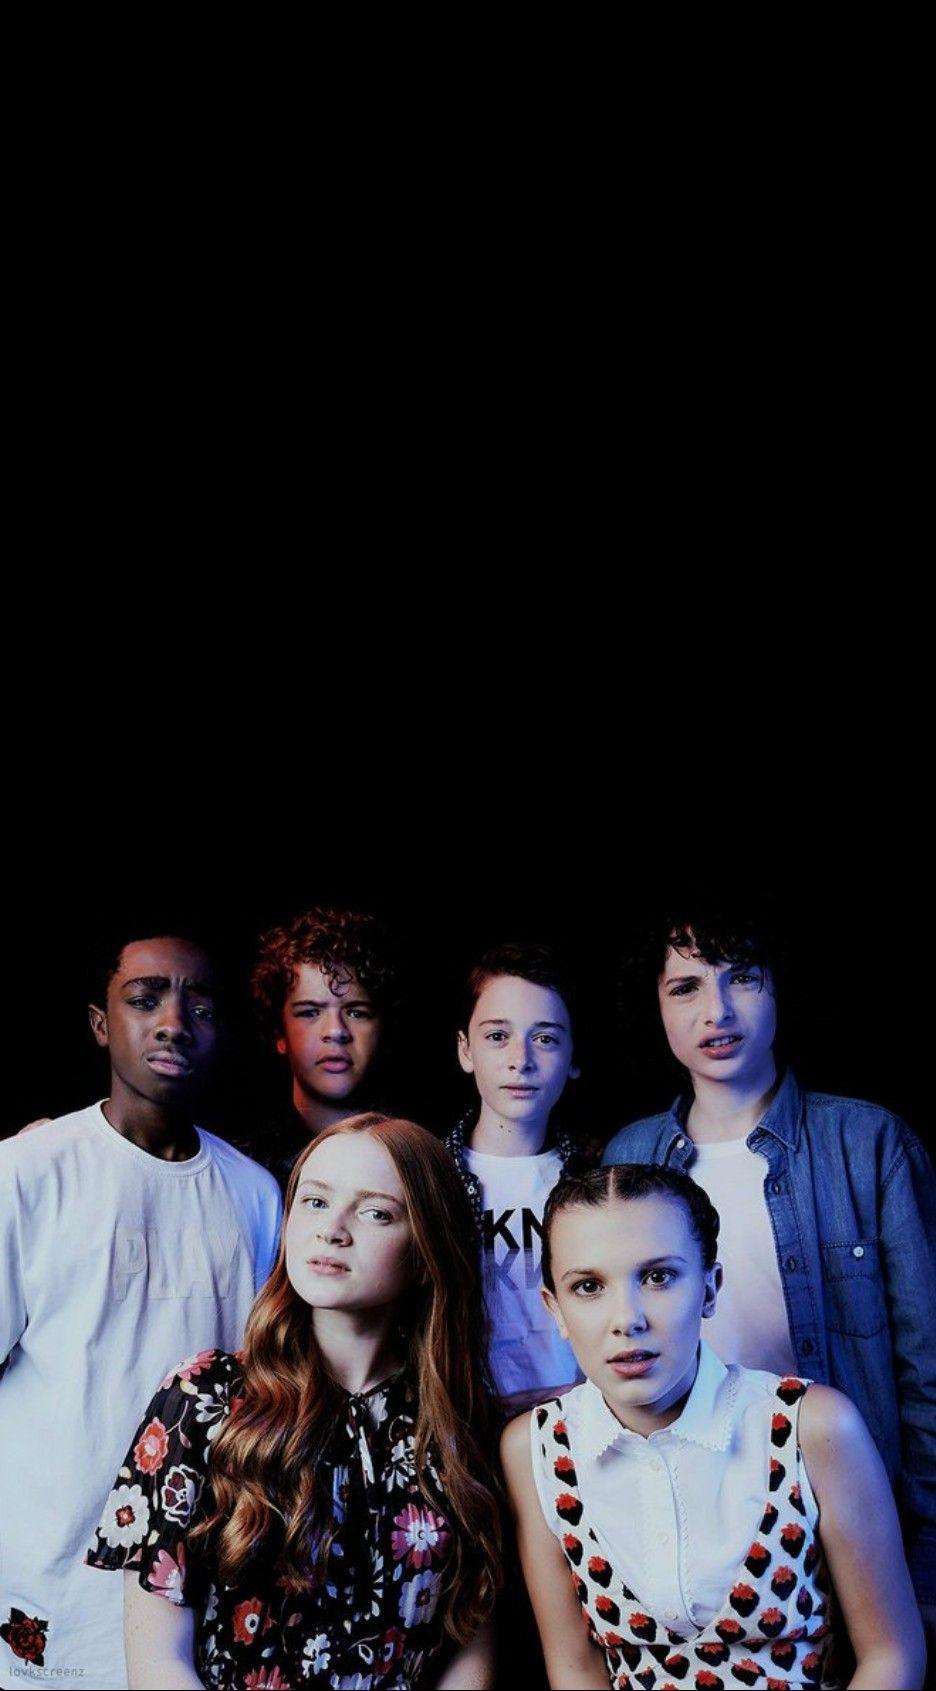 Stranger Things Wallpaper For iPhones Things Cast